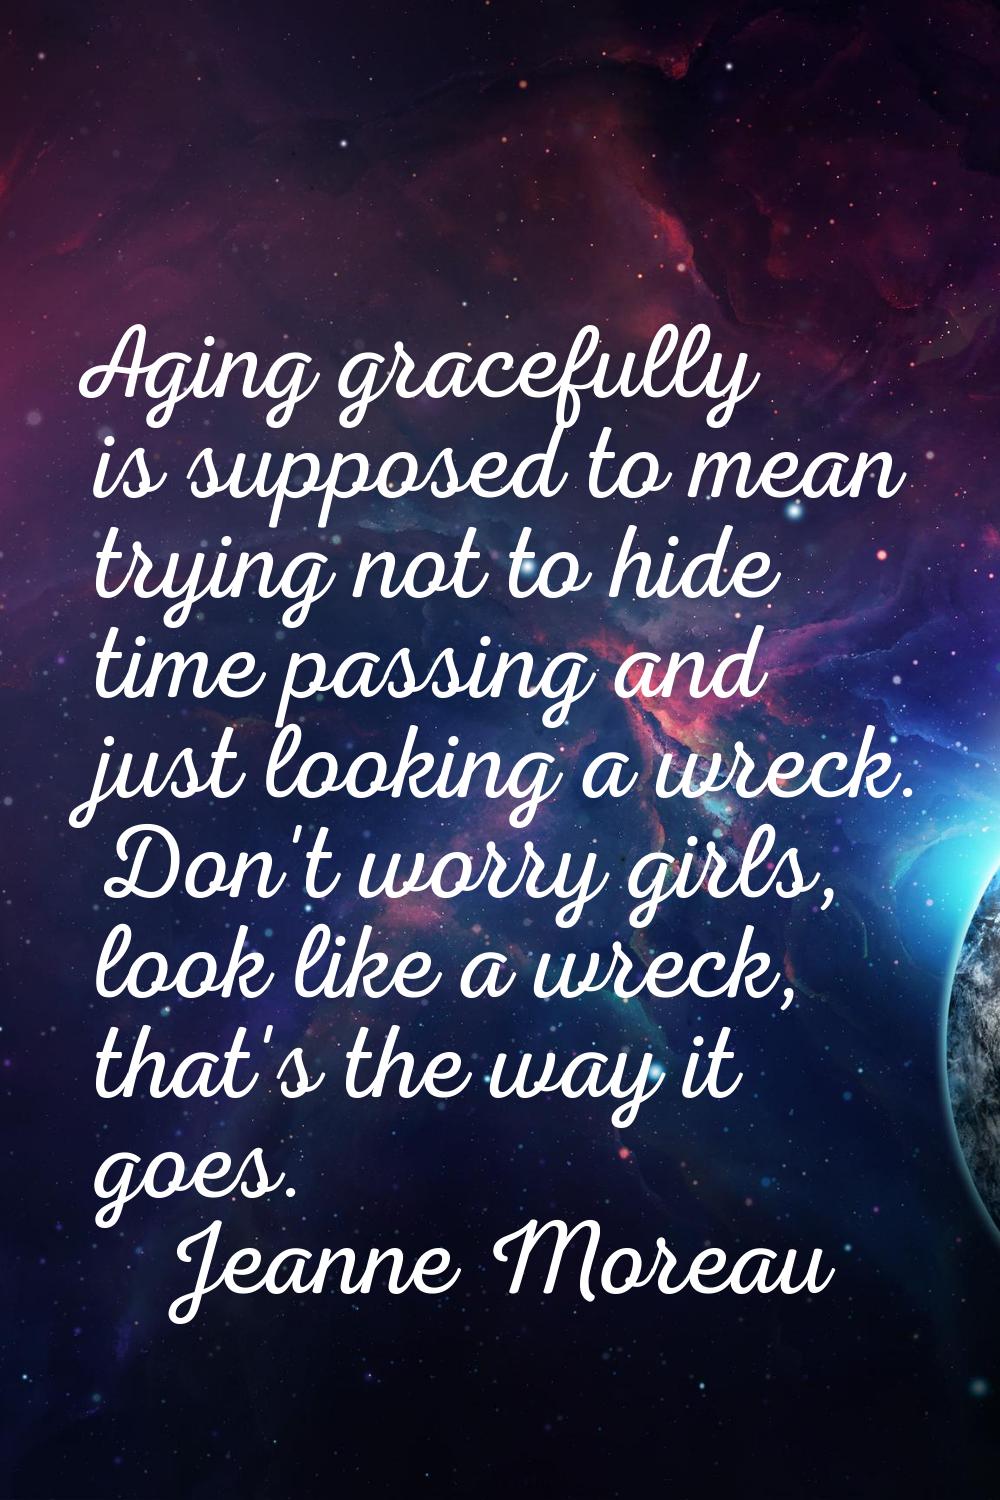 Aging gracefully is supposed to mean trying not to hide time passing and just looking a wreck. Don'